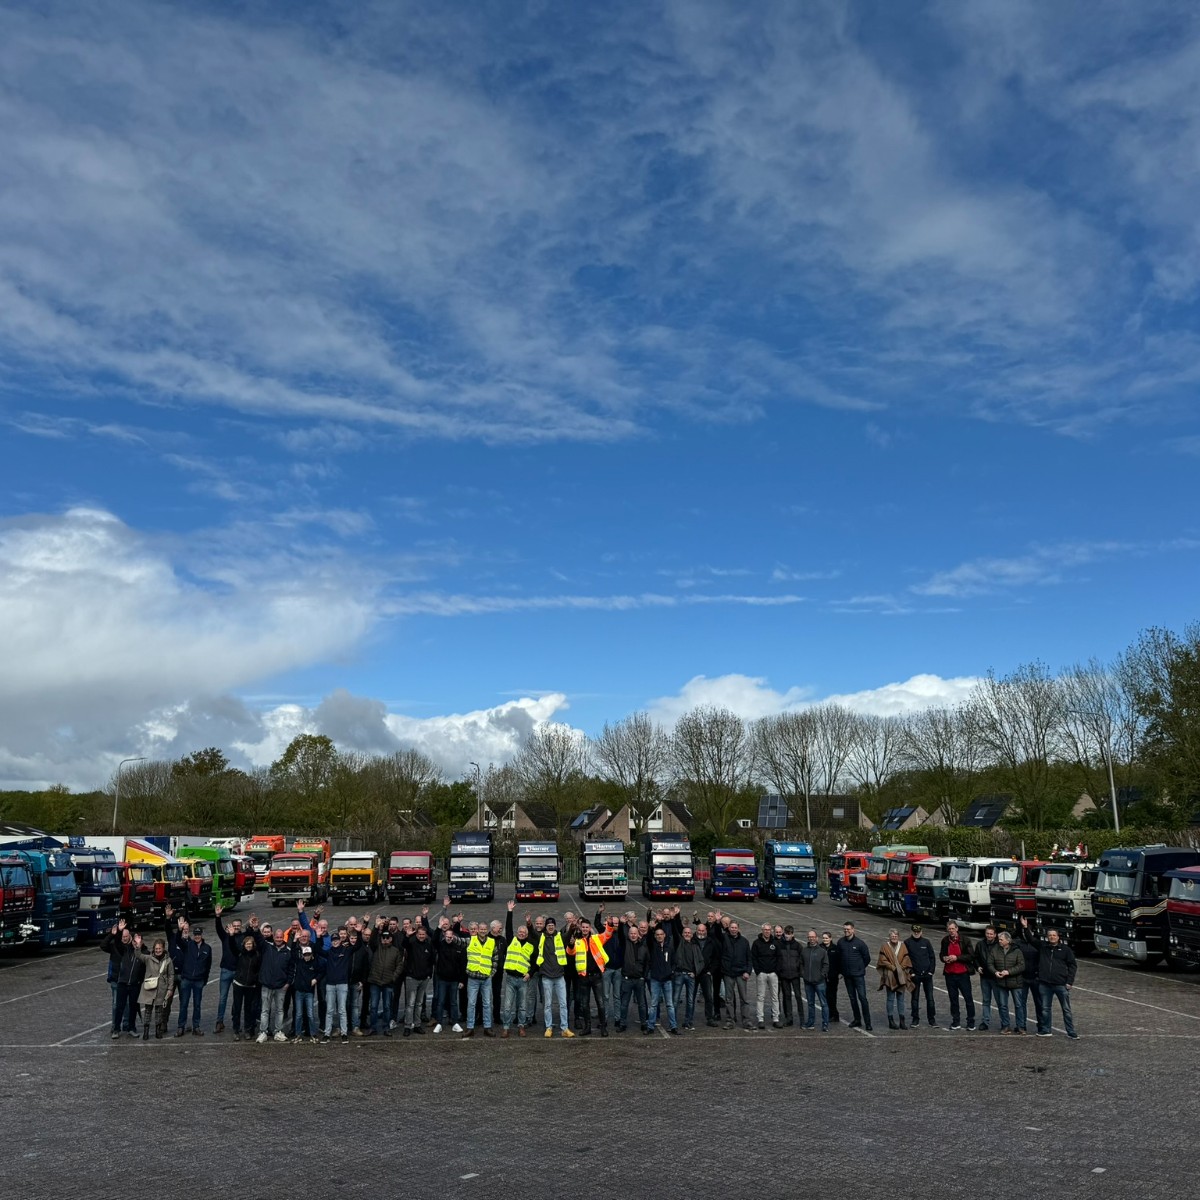 Looking back at a great weekend: the first DAF 2800 - 3600 event in The Netherlands! 🤩 The event is a cooperation between the DAF Fan social media community and DAF Trucks. @DAF_trucks_fans | #daftrucks